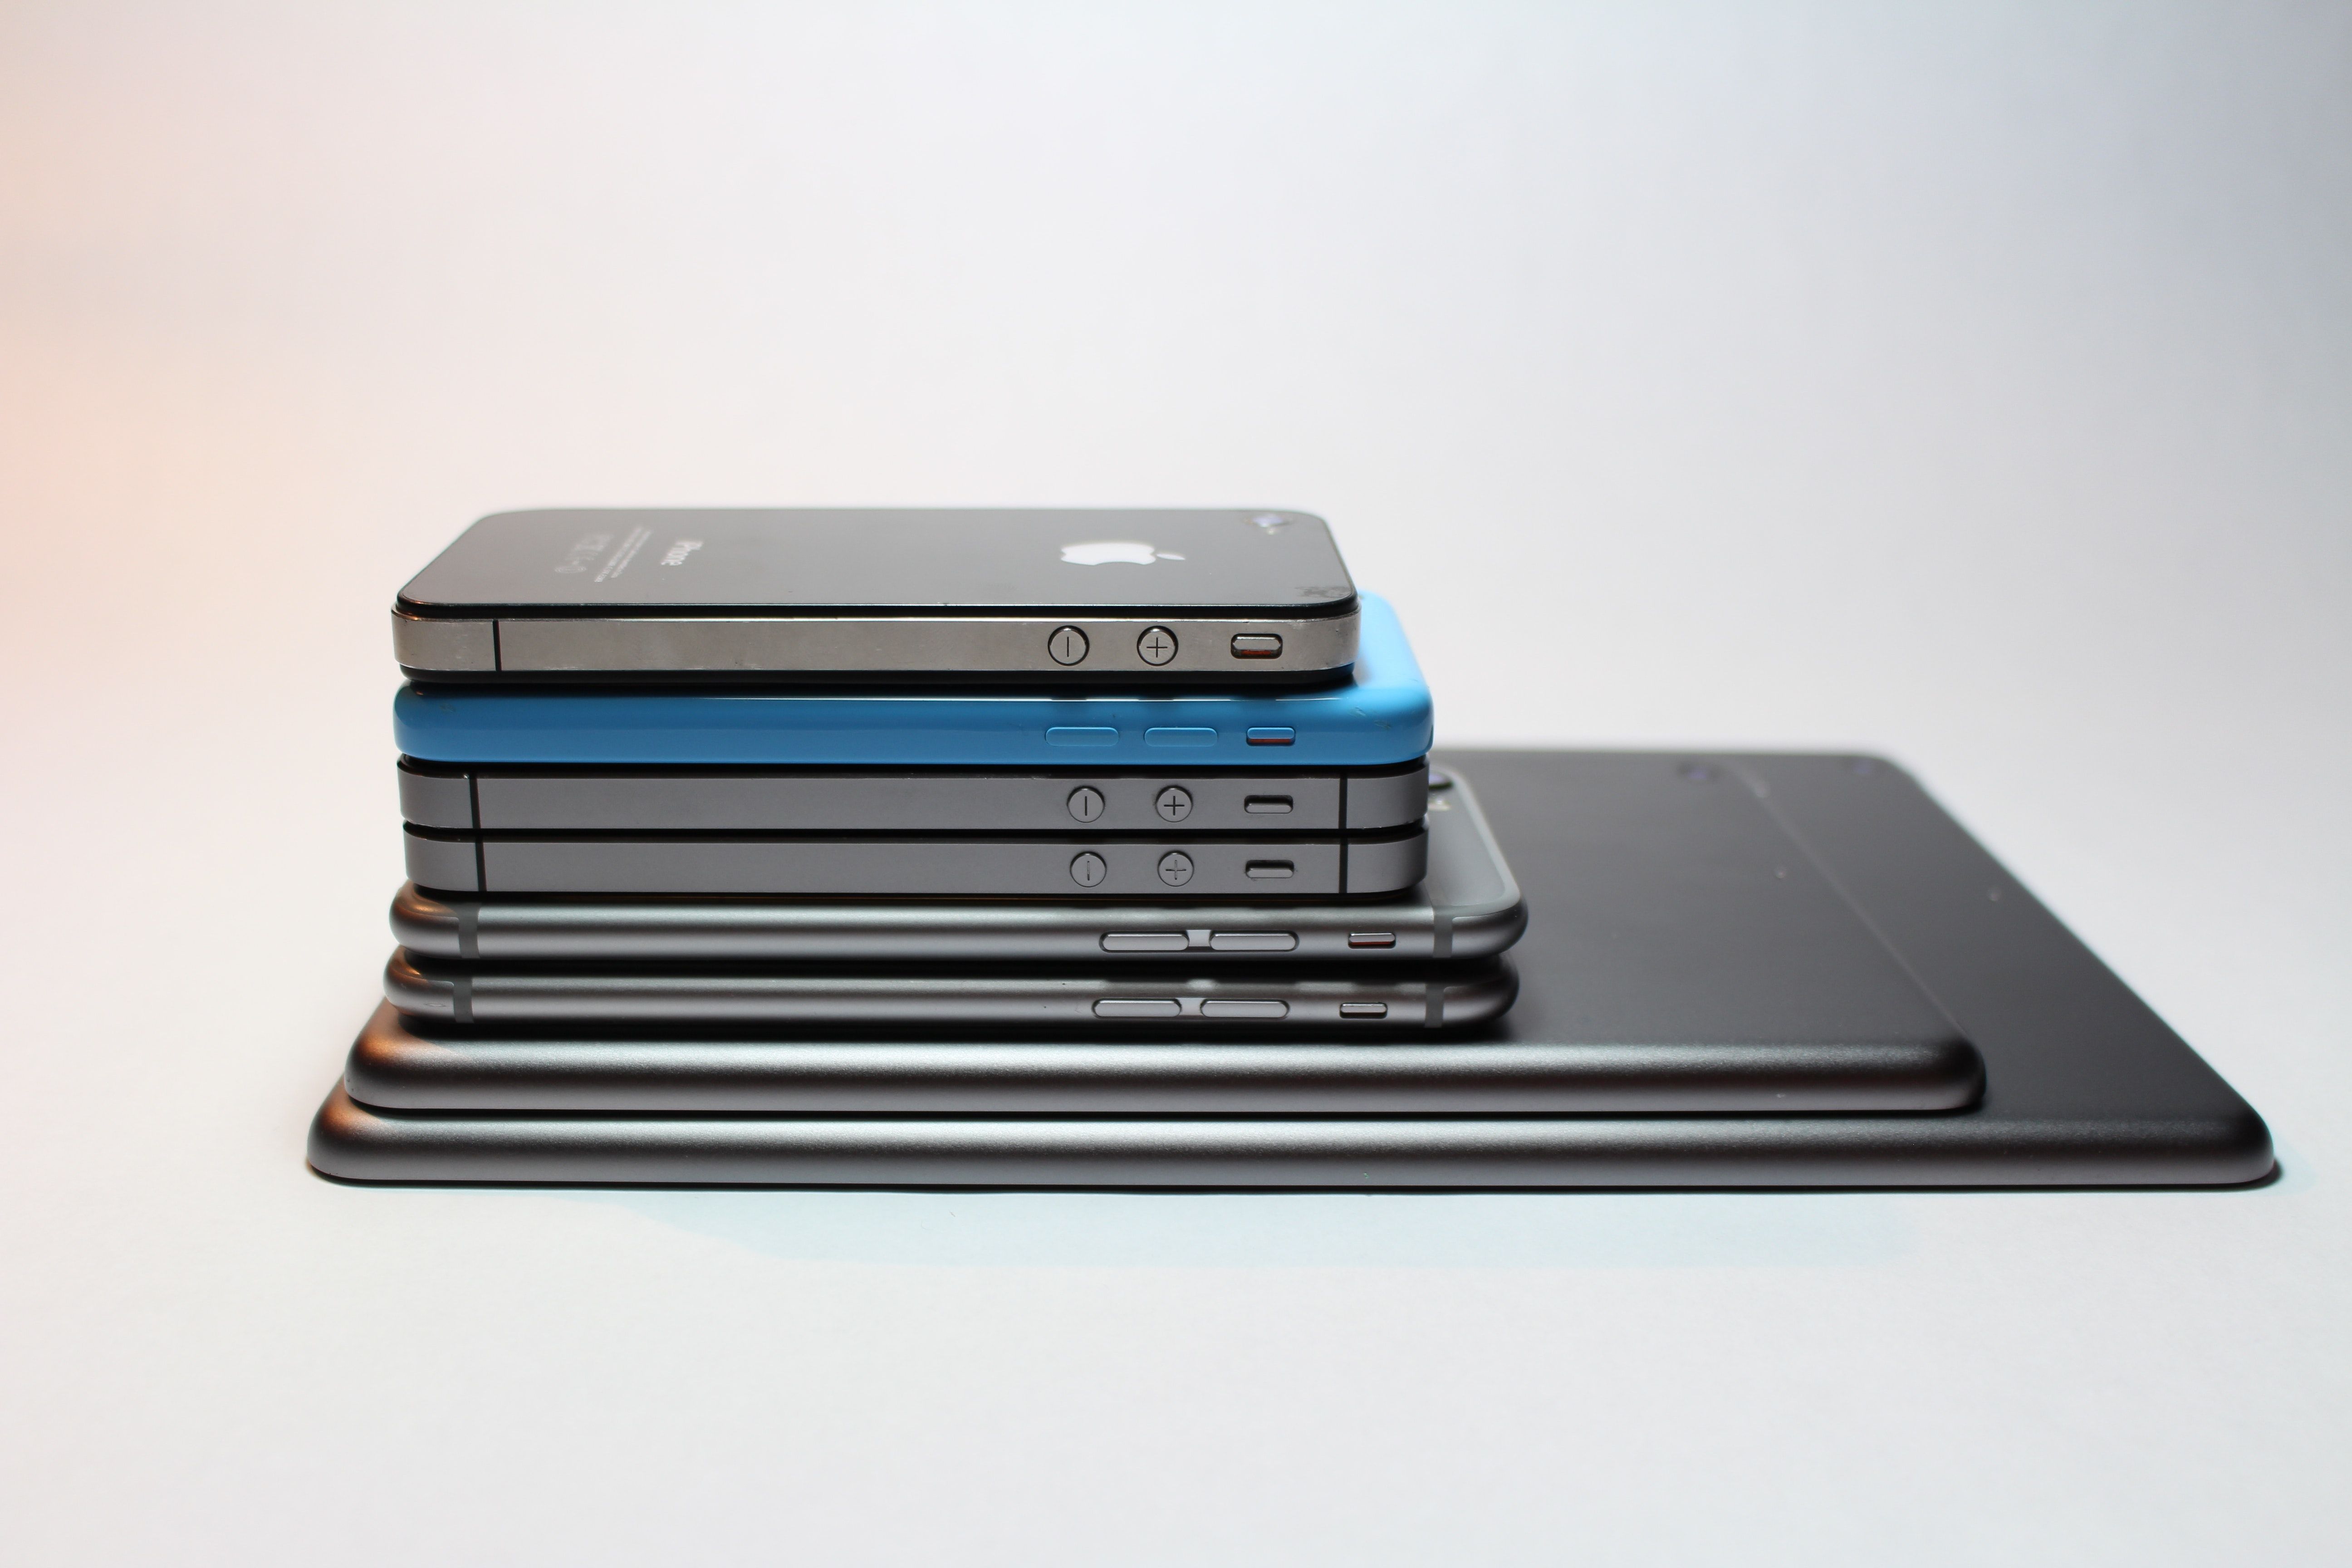 iPhones and iPads stacked together in different sizes